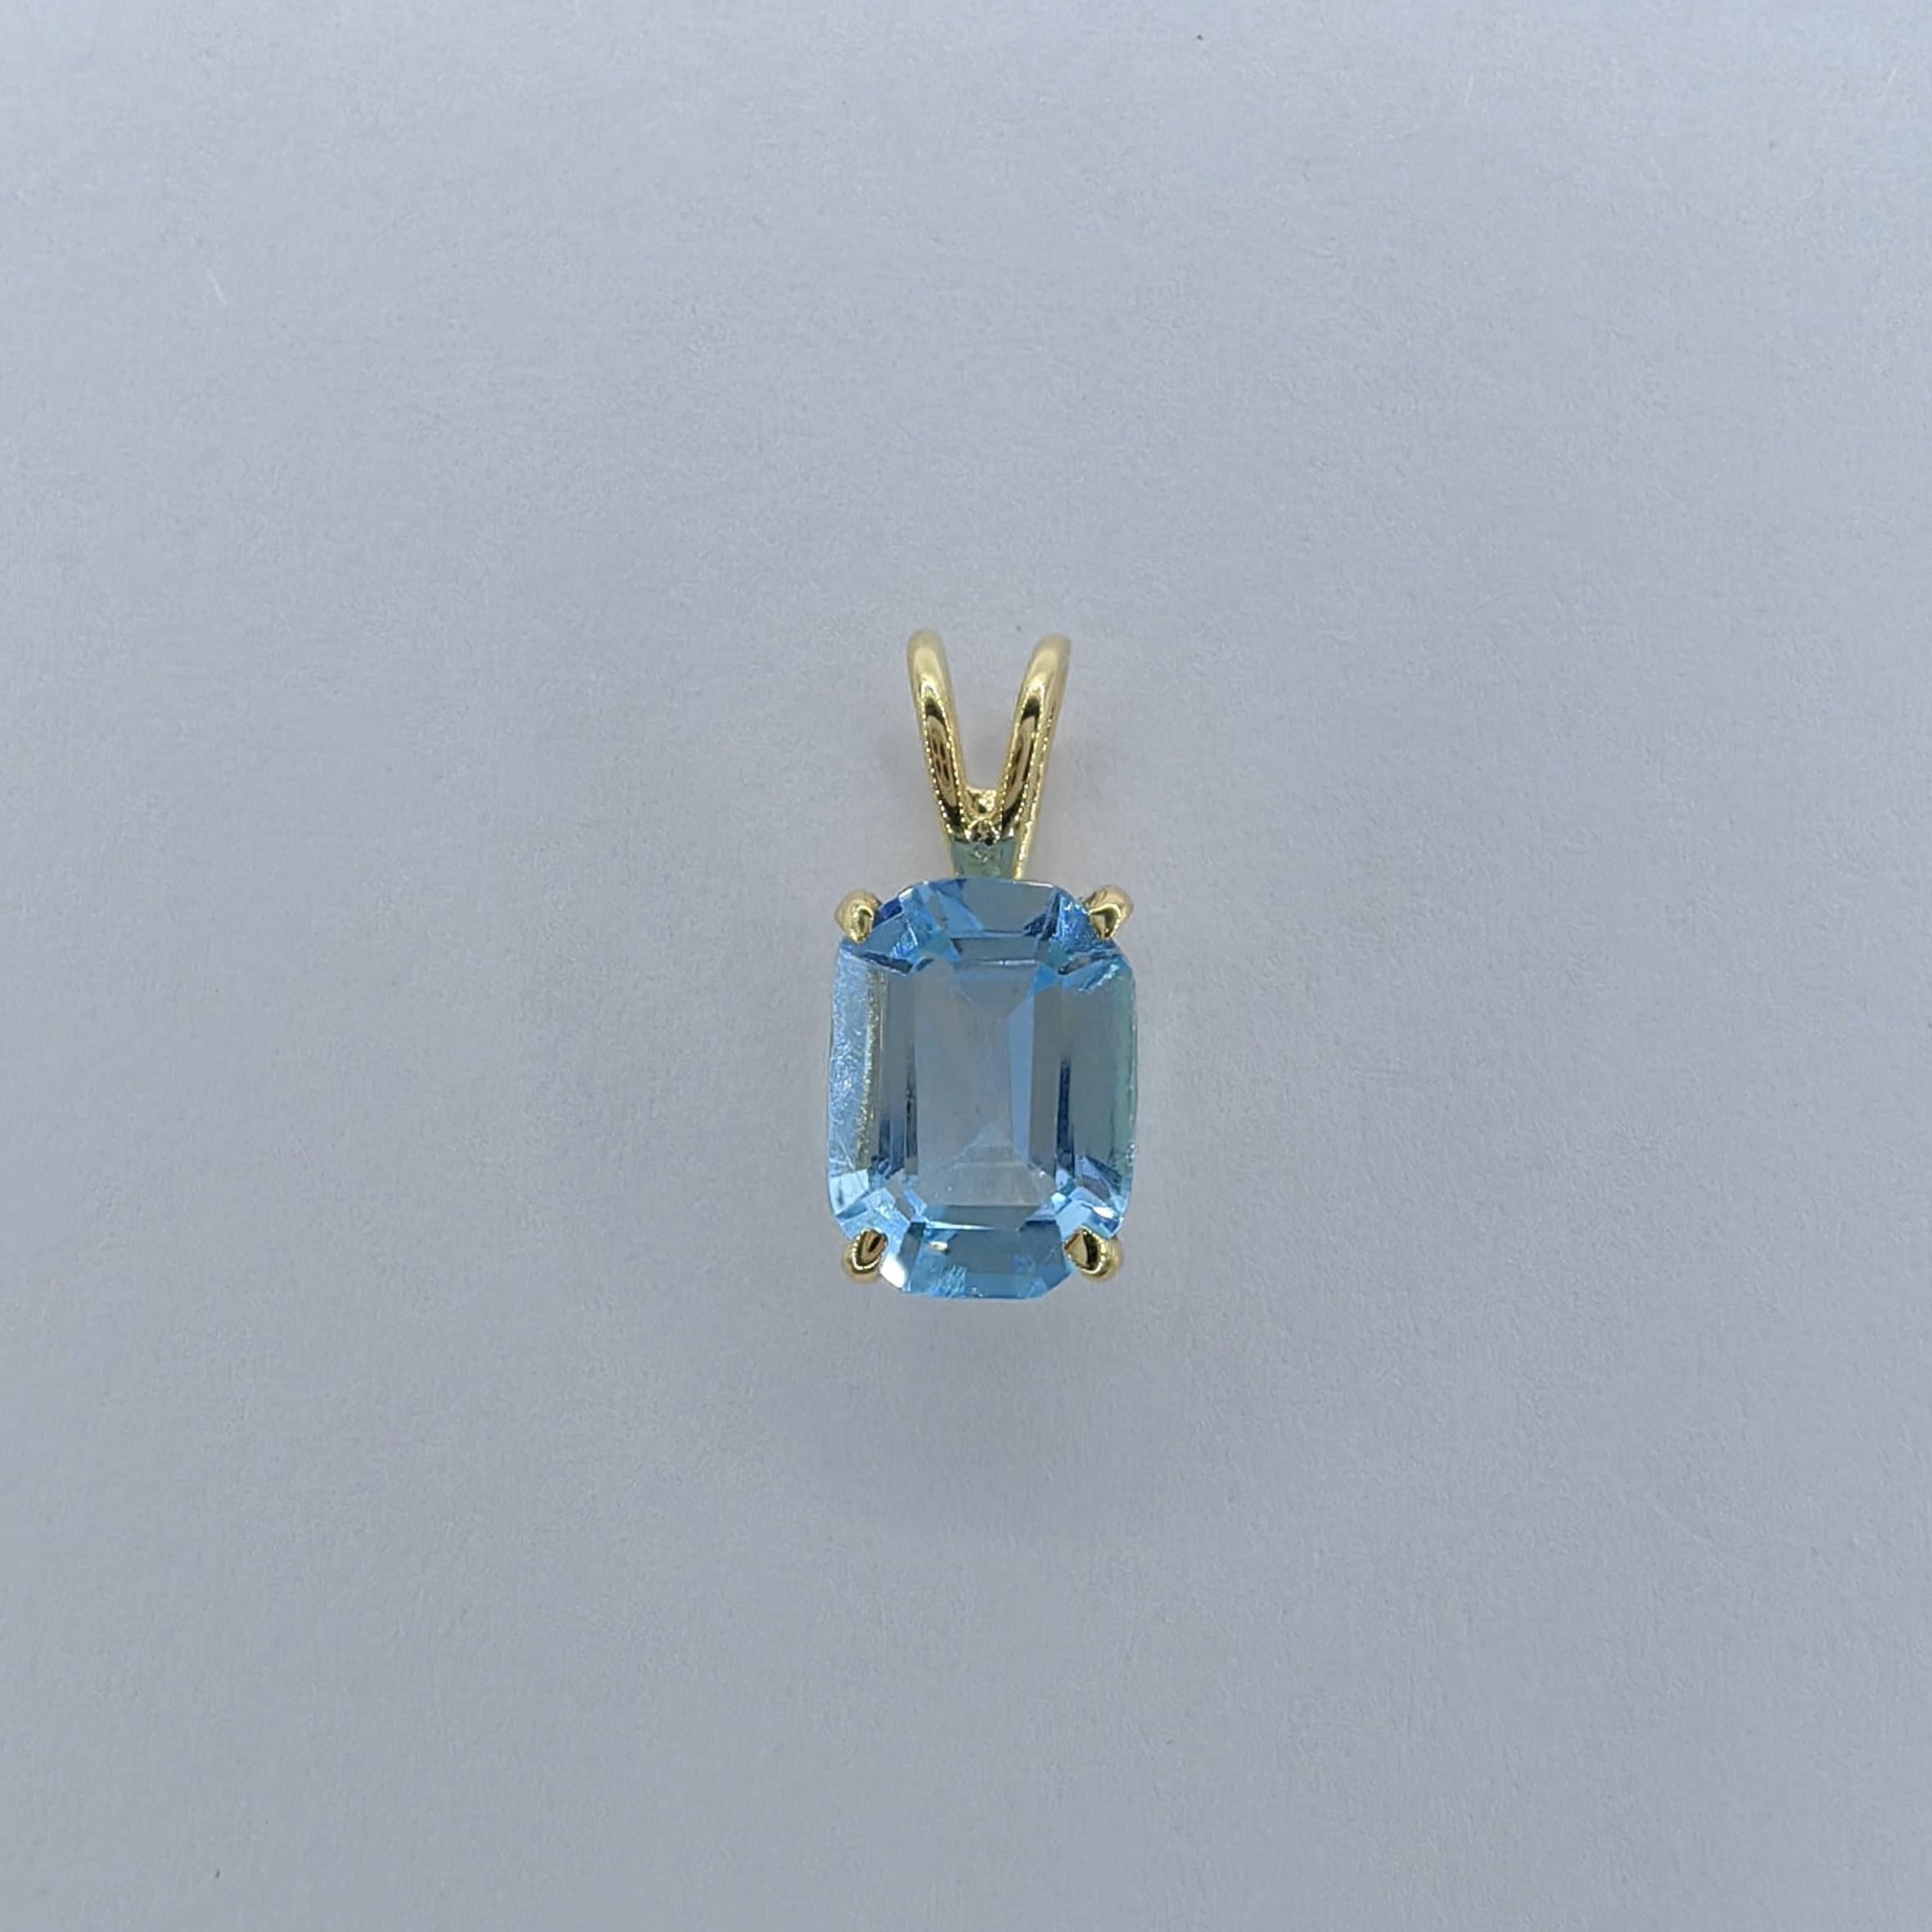 Vintage 1980's Emerald Cut Blue Topaz Necklace Pendant in 14K Yellow Gold #2 For Sale 1